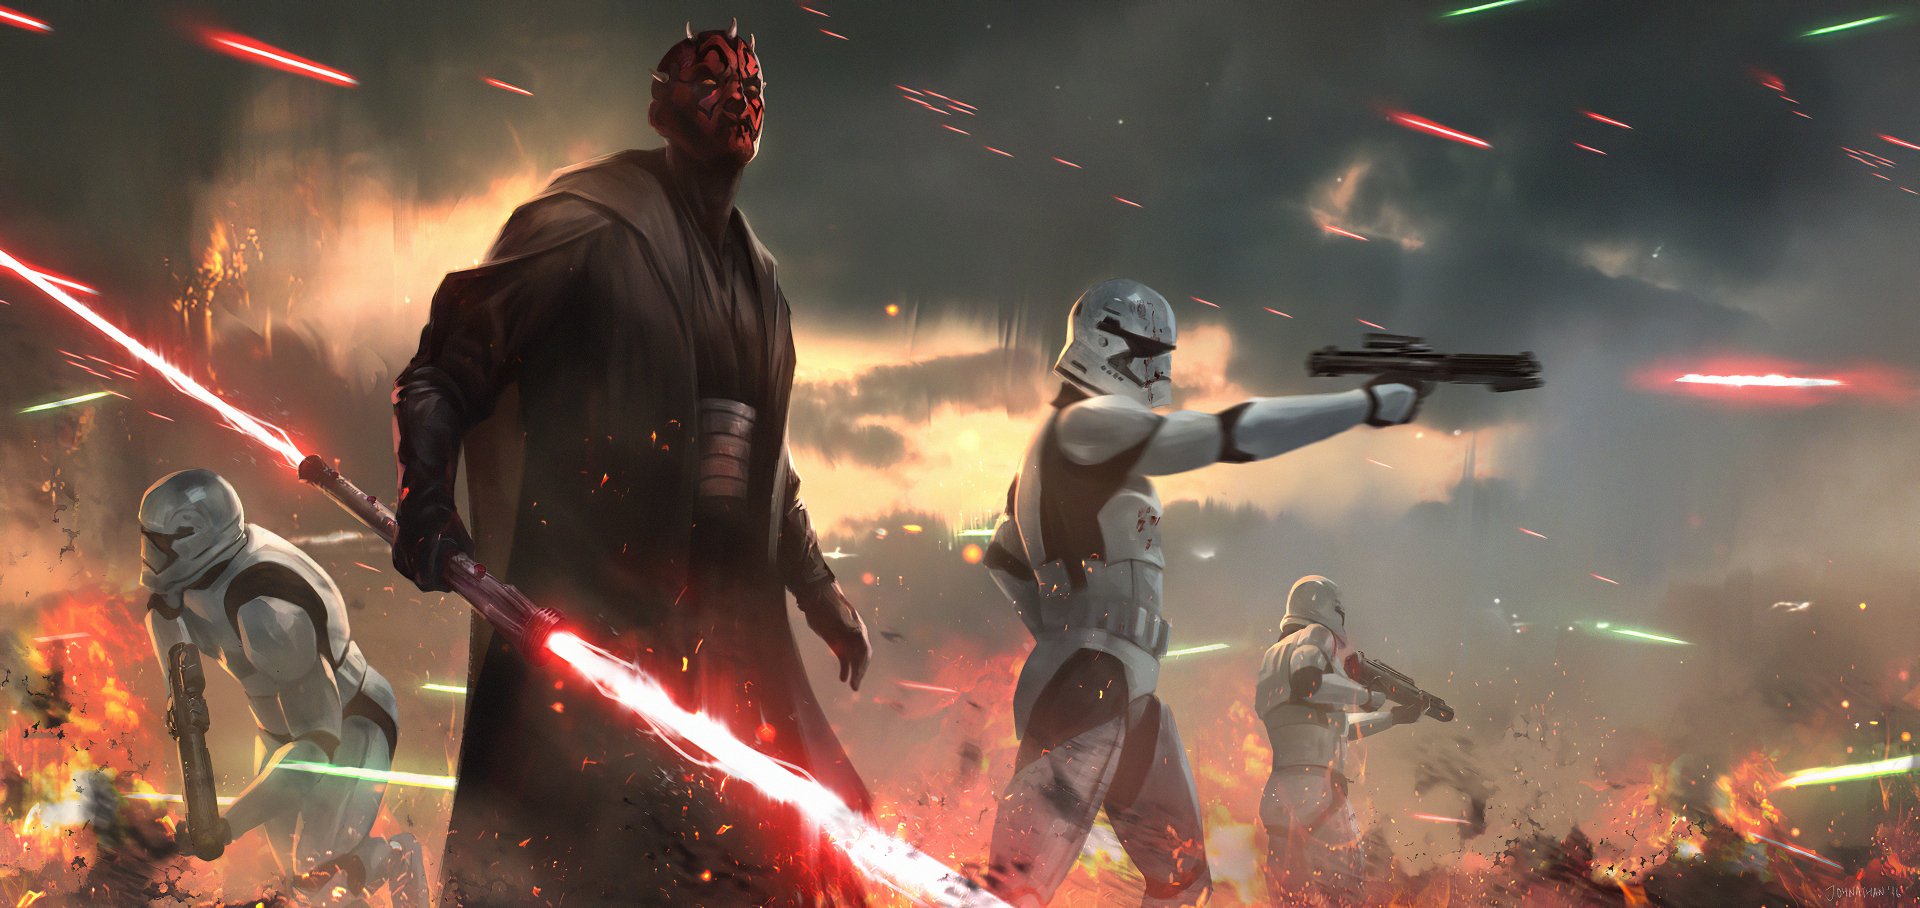 Darth Maul and stormtrooper duel with lightsabers in an epic battle scene, set against a Star Wars-themed HD desktop wallpaper.